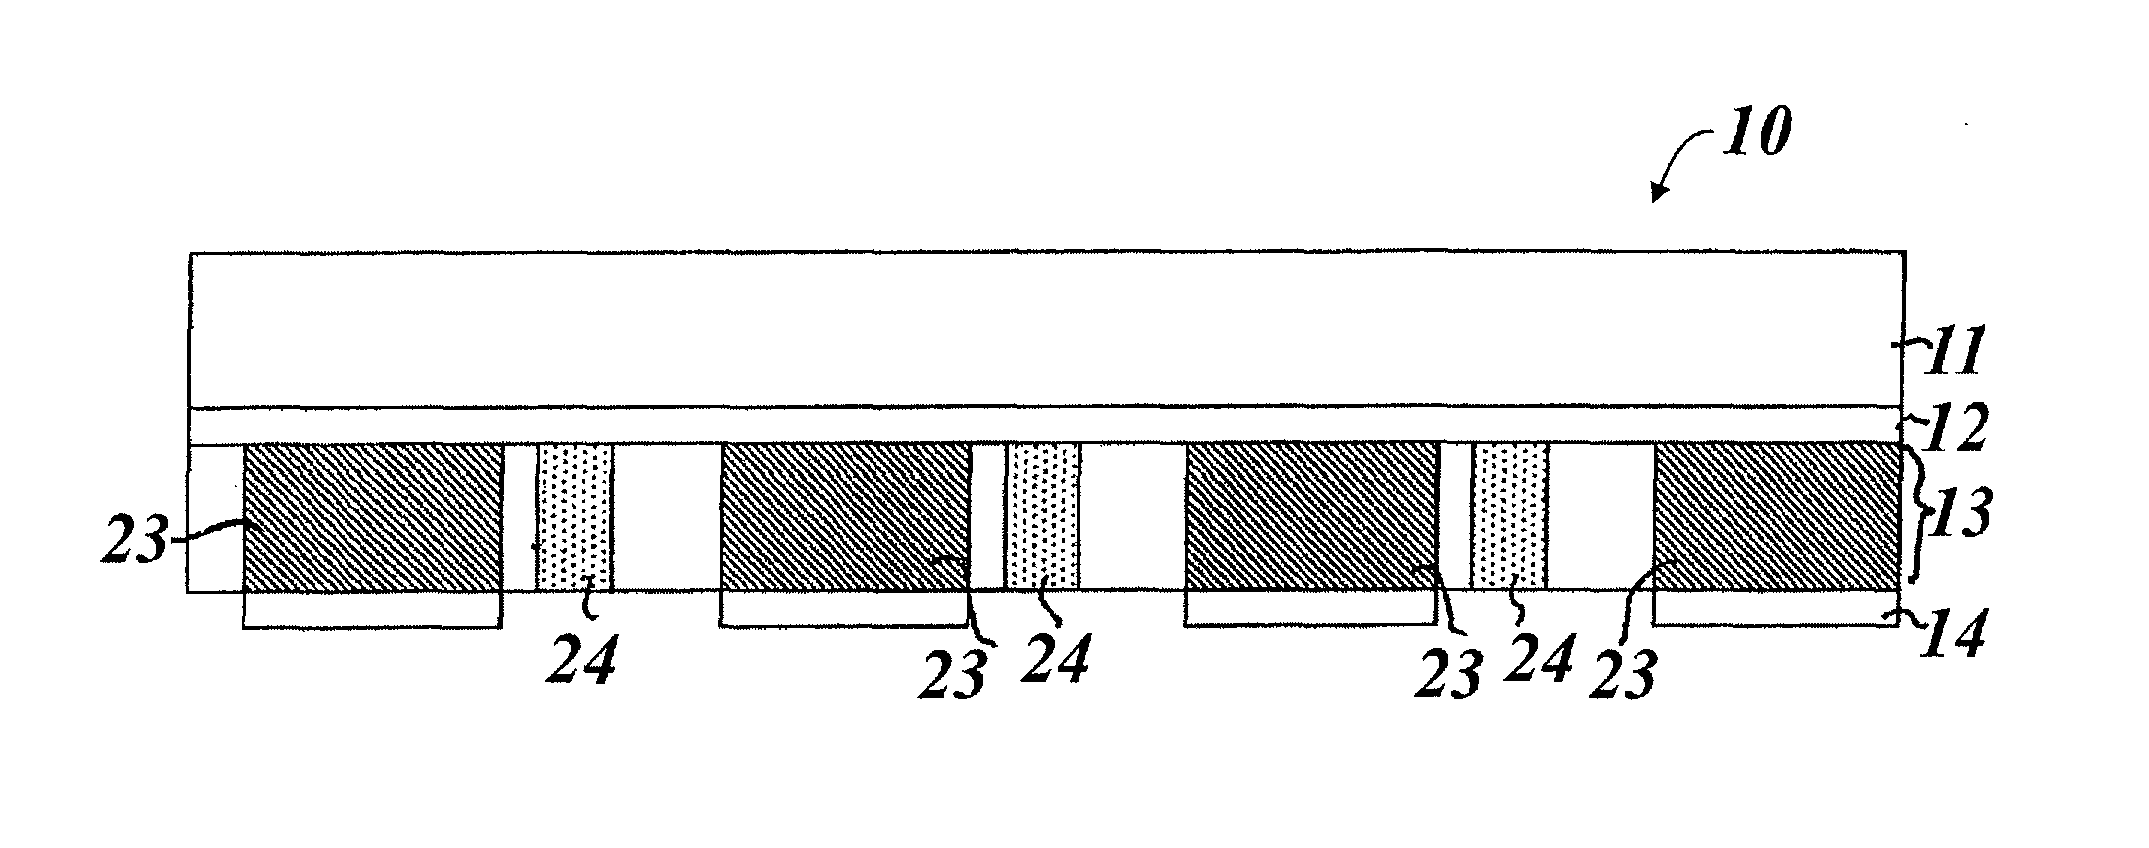 Method for decorating surfaces